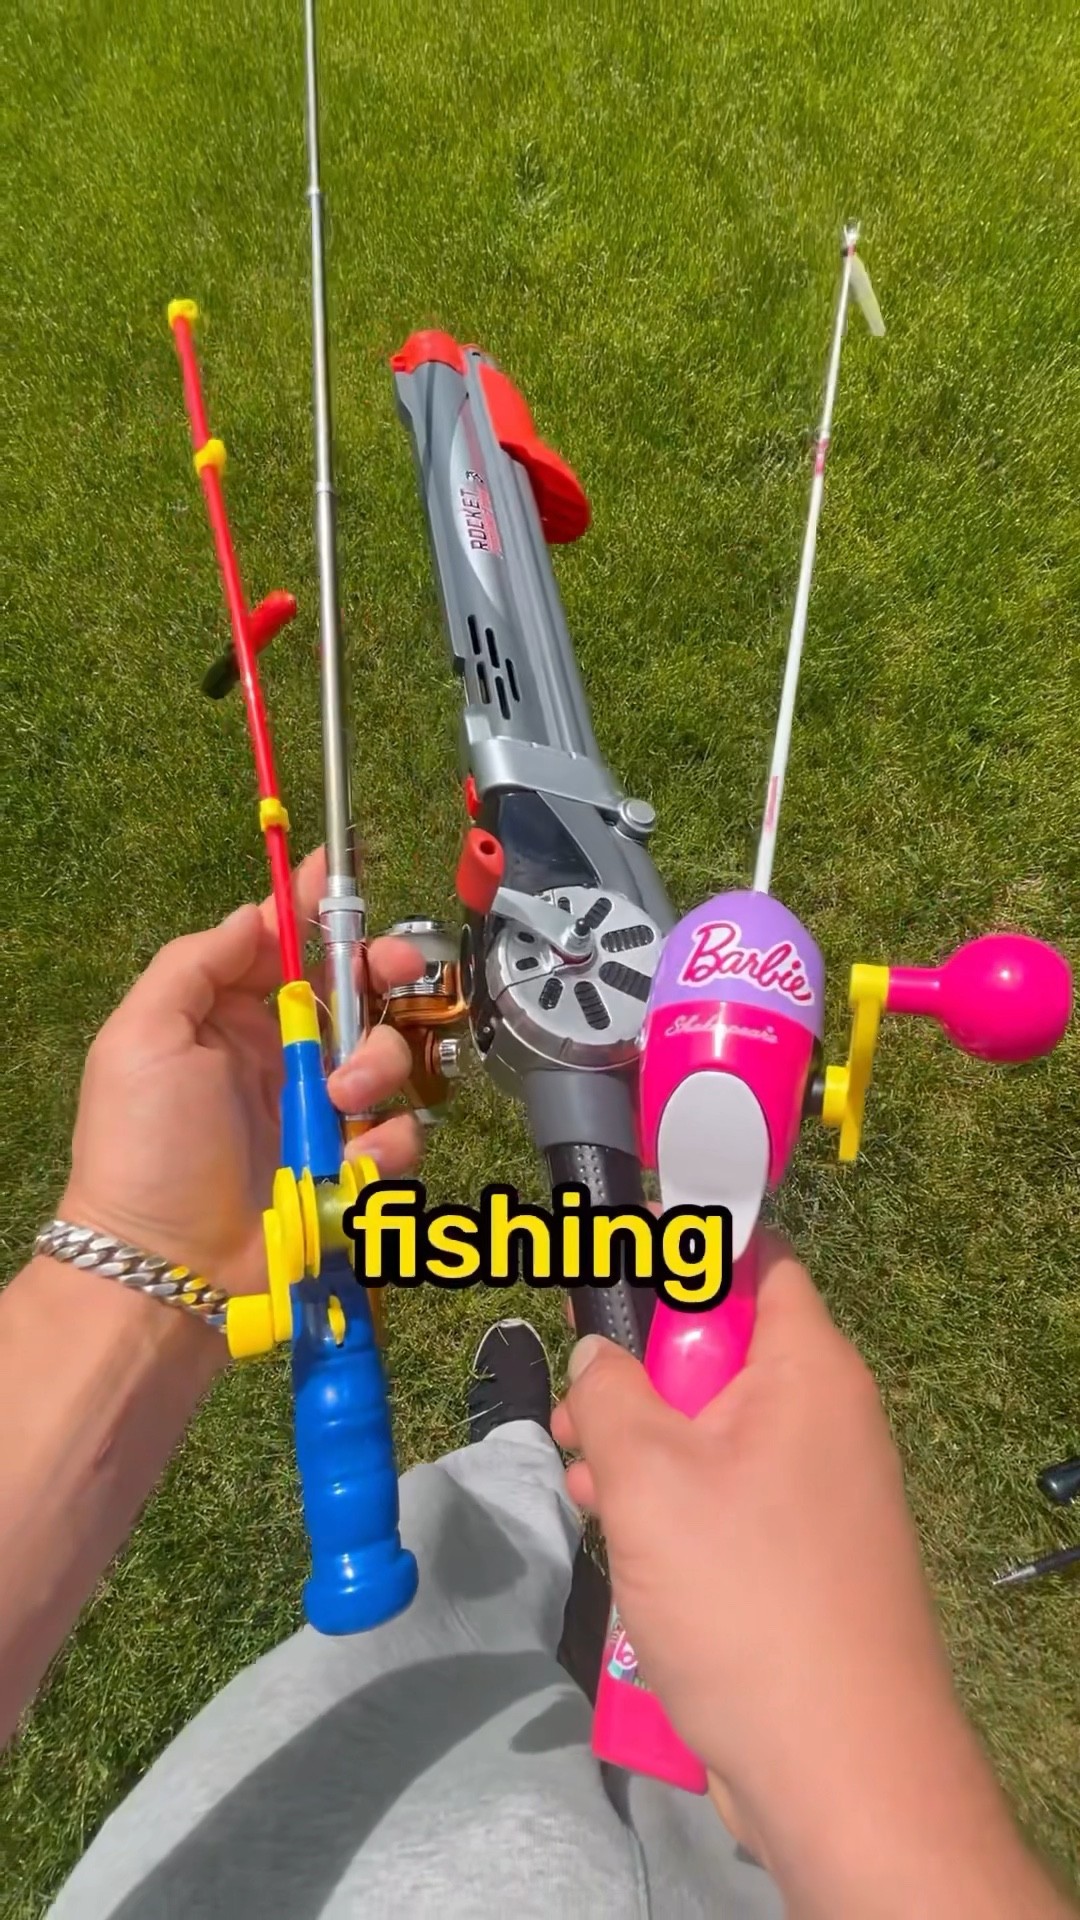 Try this INSANE URBAN FISHING TRICK!! (IT WORKS)